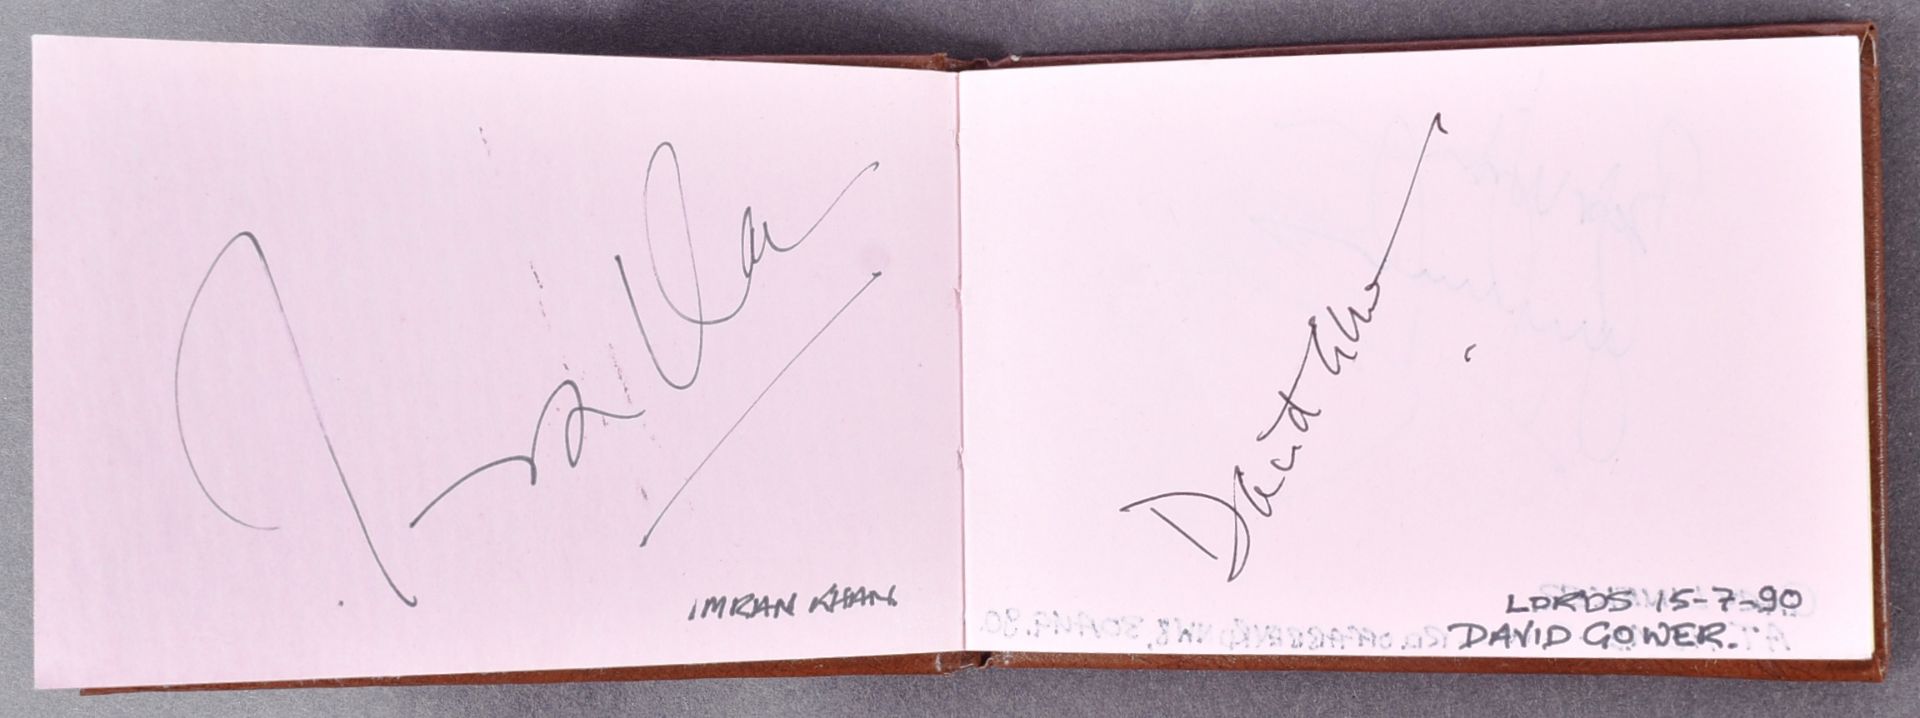 GERALD WHITNEY COLLECTION (CAMERA MAN) - AUTOGRAPH BOOK - Image 3 of 8